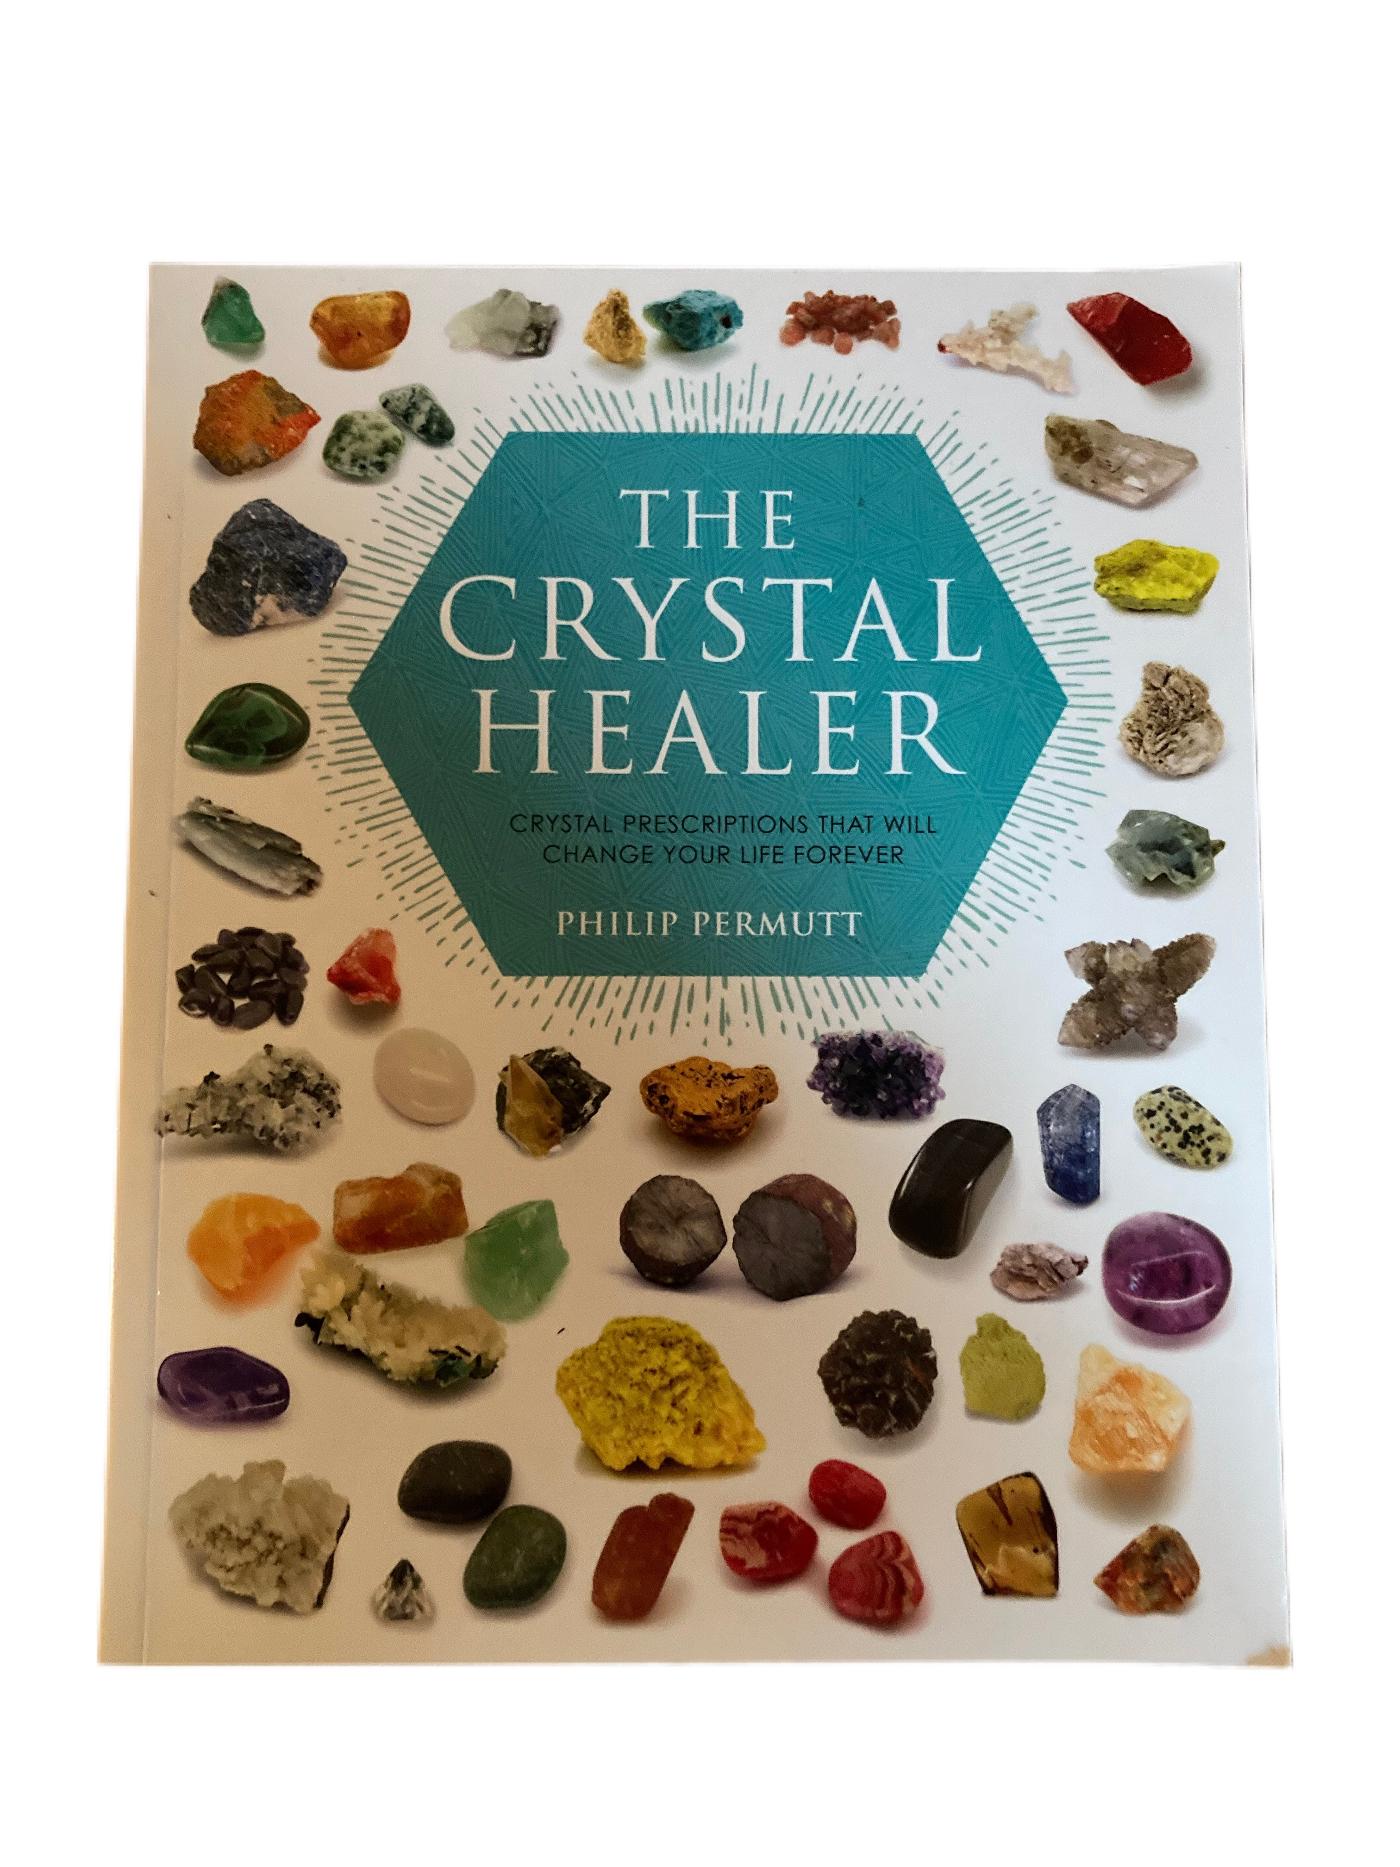 The Crystal Healer by Phillip Permutt